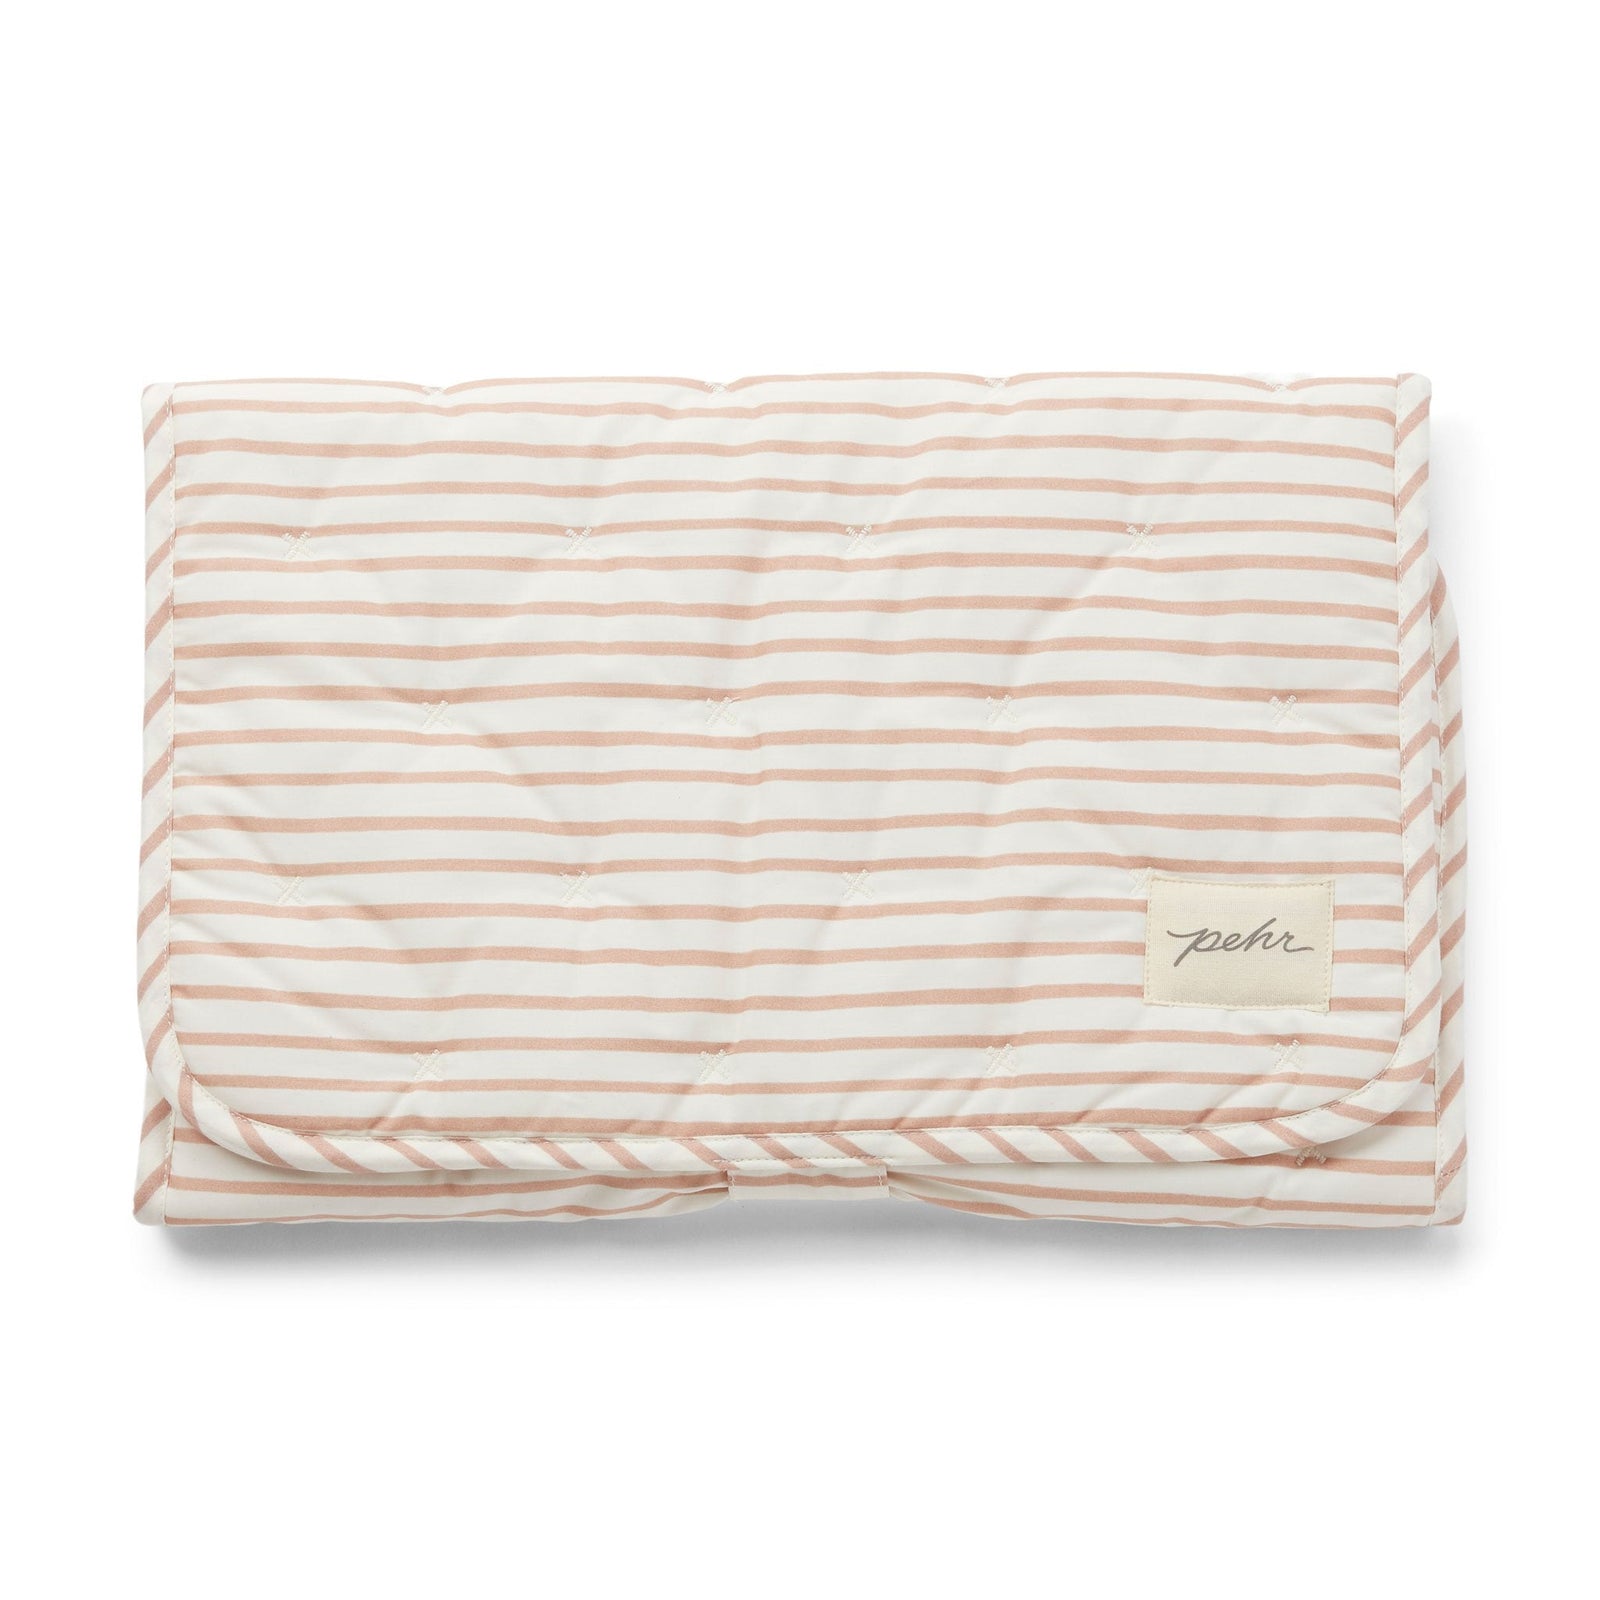 Striped On the Go Portable Changing Pad Changing Pad Pehr Stripes Away Rose Pink  